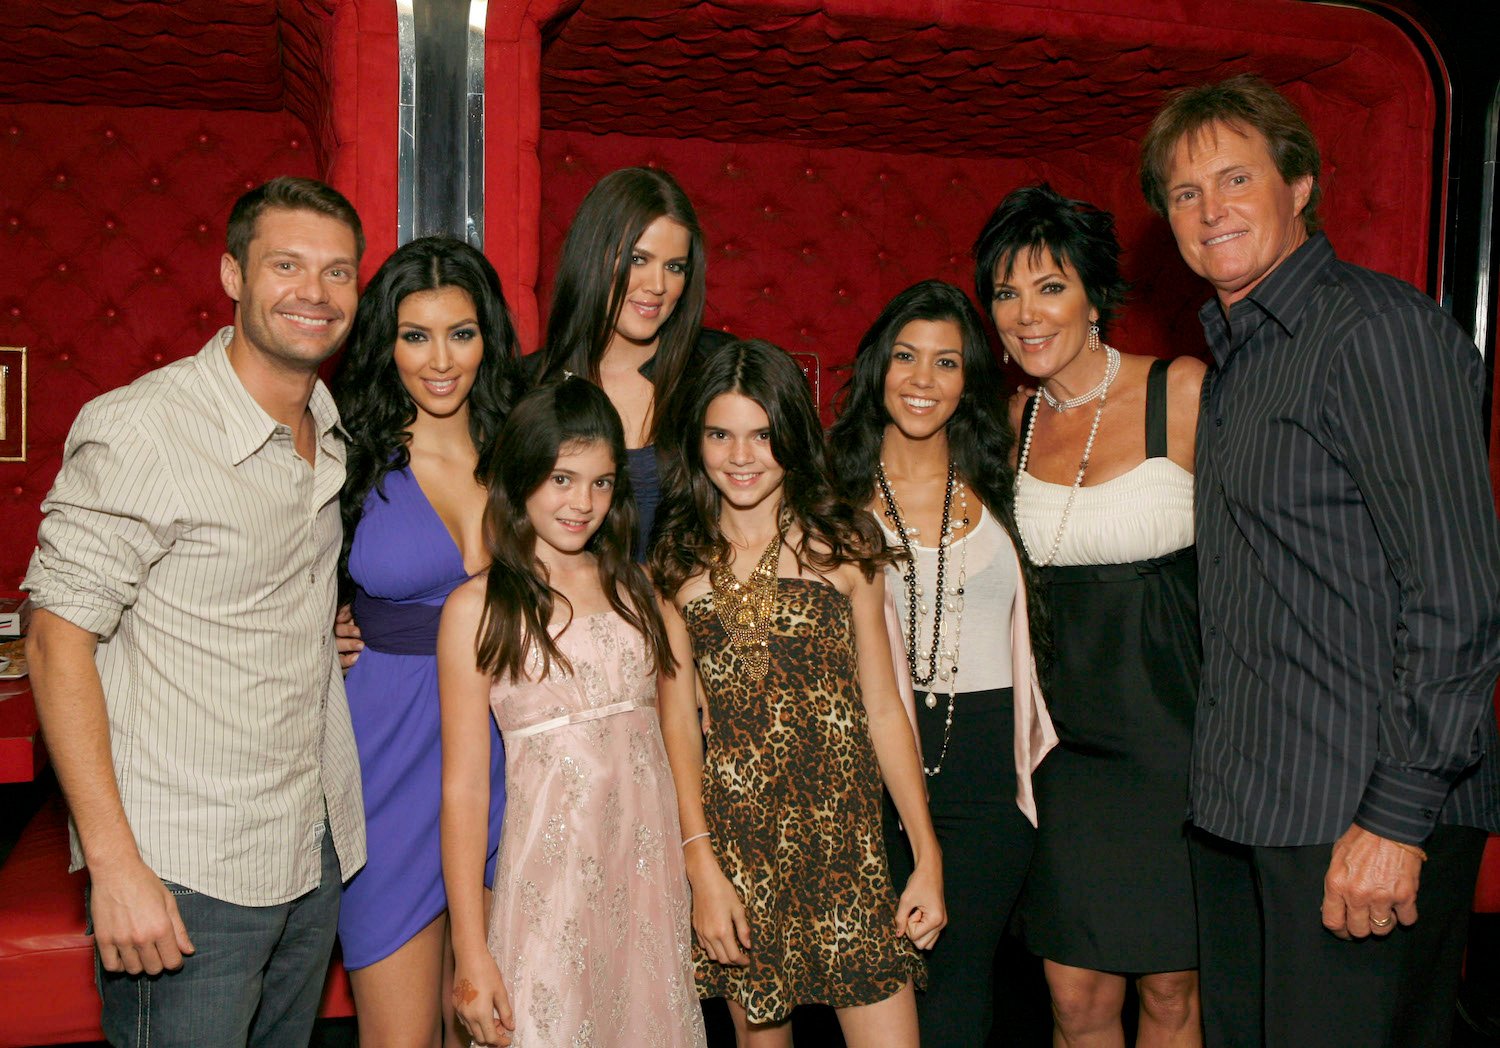 Ryan Seacrest, Kim Kardashian, Kylie Jenner, Khloe Kardashian, Kendall Jenner, Kourtney Kardashian, Kris Jenner, and Bruce Jenner pose for a photo at the 'Keeping Up With the Kardashians' viewing party